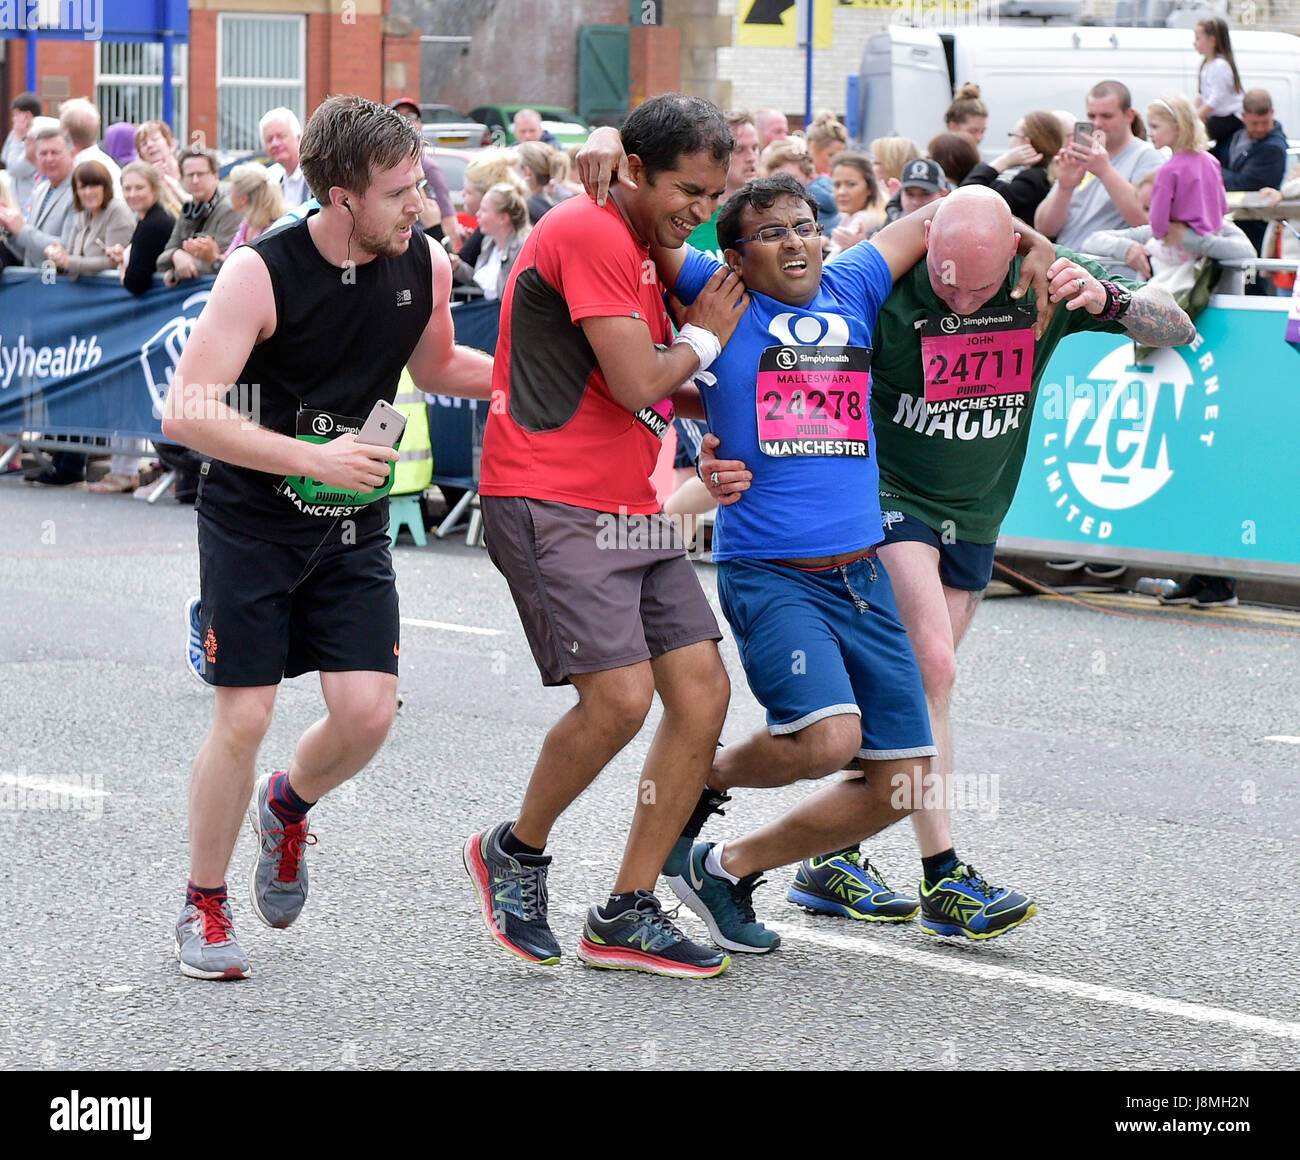 Runners and athletes take part in the 2017 Simplyhealth Great Manchester Run half marathon and 10k run Stock Photo